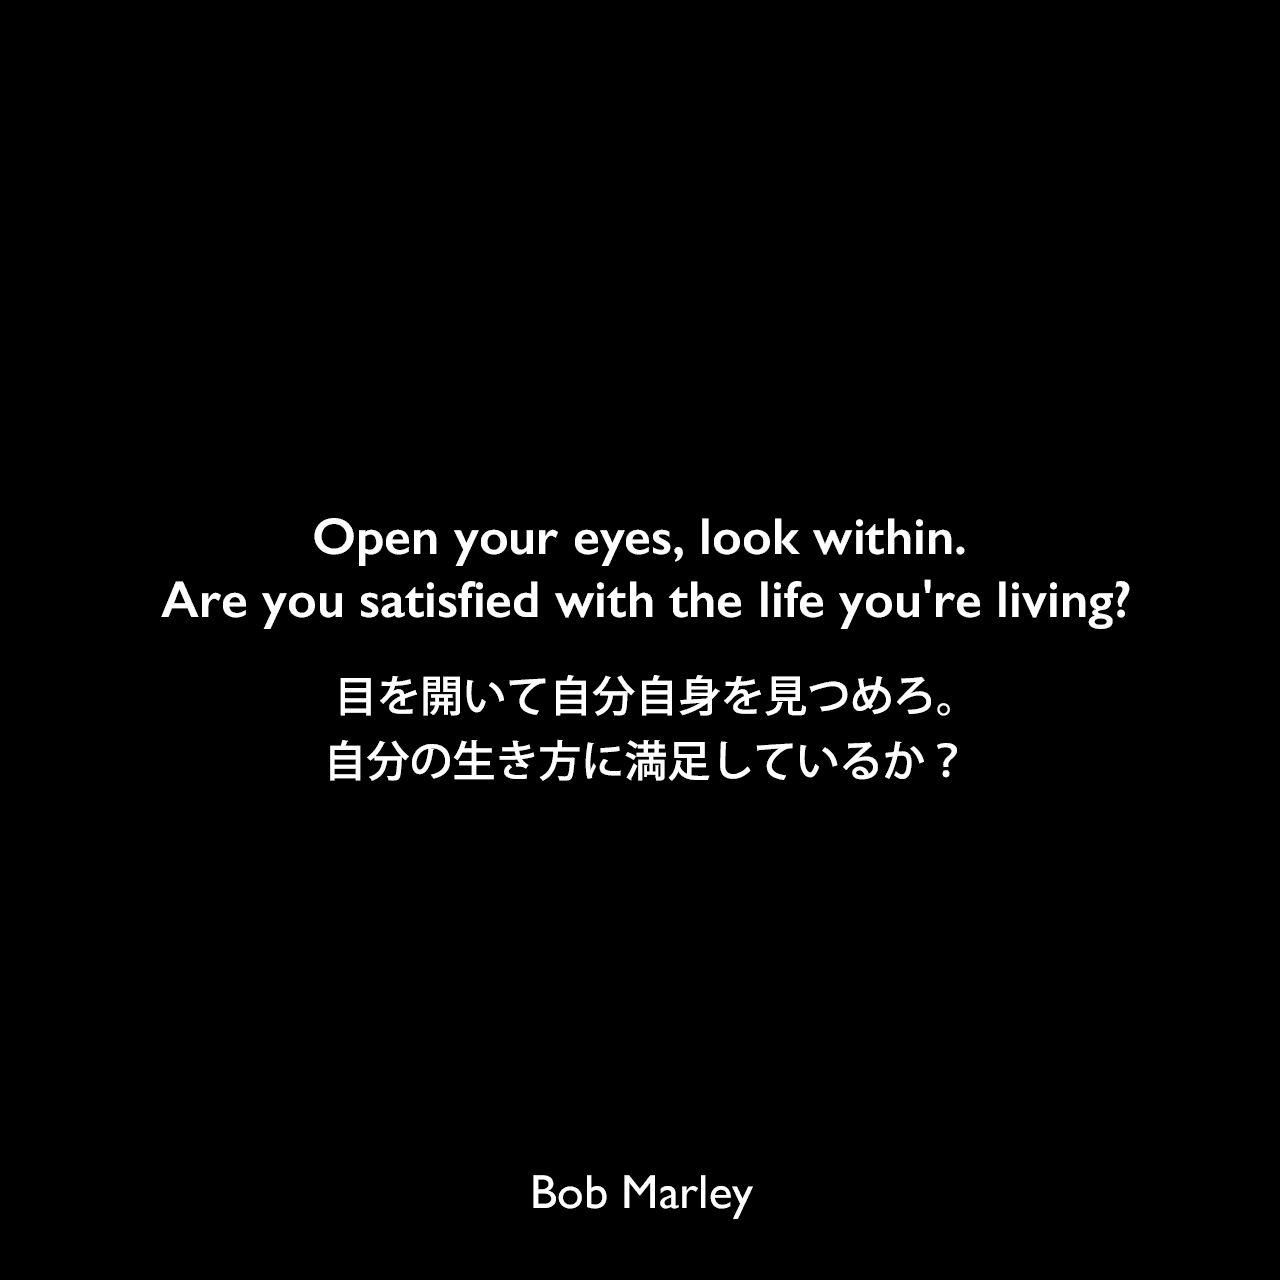 Open your eyes, look within. Are you satisfied with the life you’re living?目を開いて自分自身を見つめろ。自分の生き方に満足しているか？